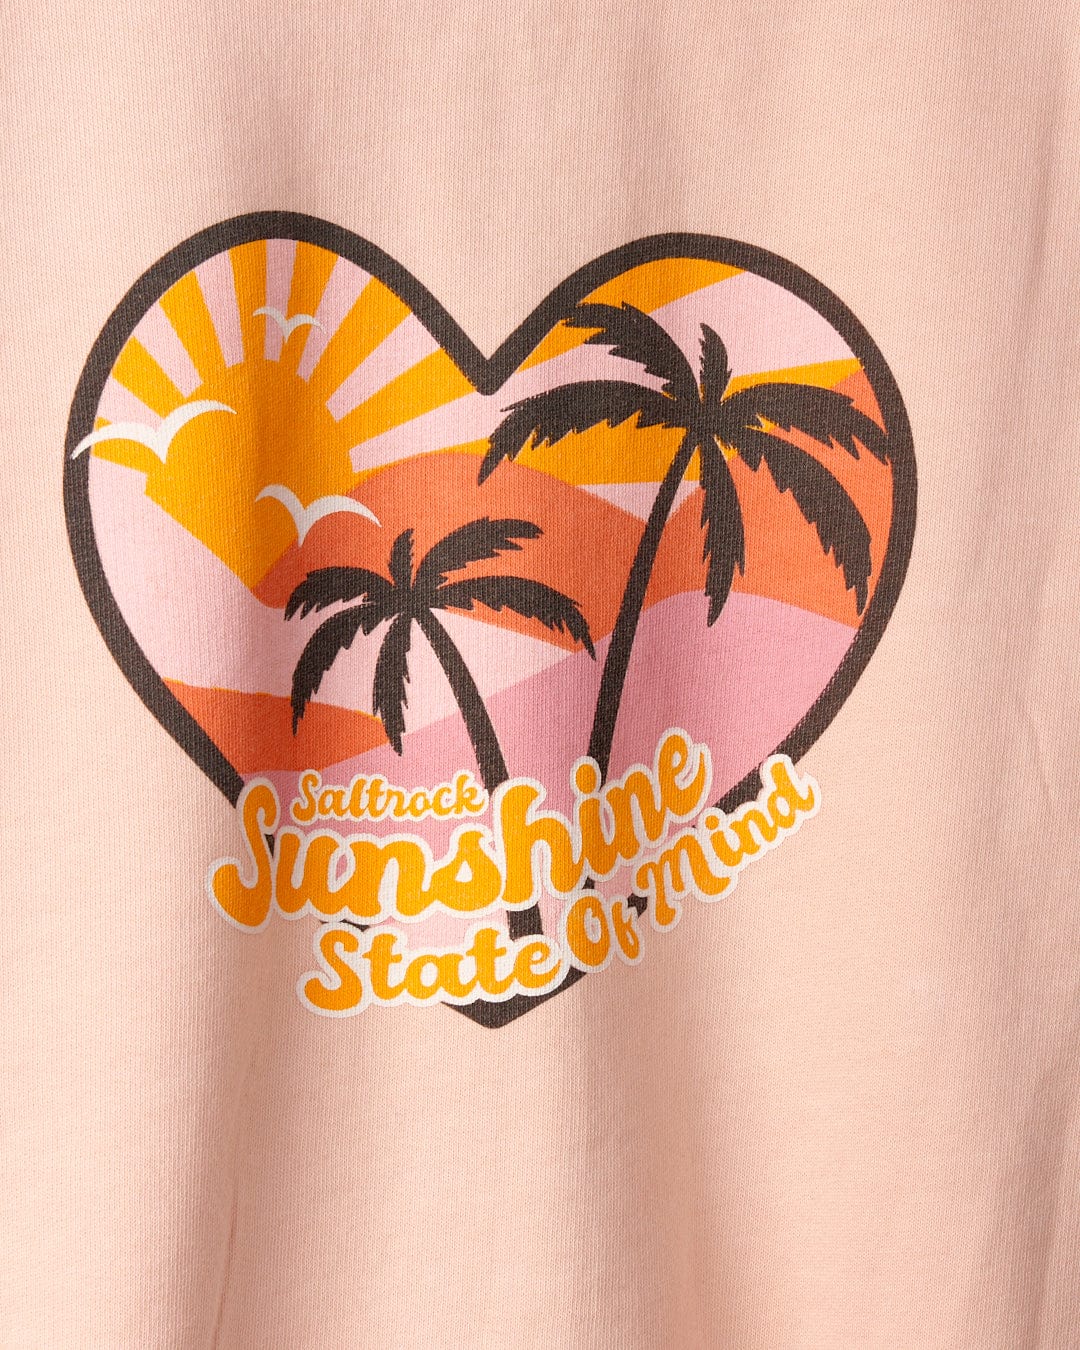 A graphic of a heart-shaped sunset with palm trees, labeled "Sunshine State" on a pink Saltrock Kids Zip Hoodie - Peach.